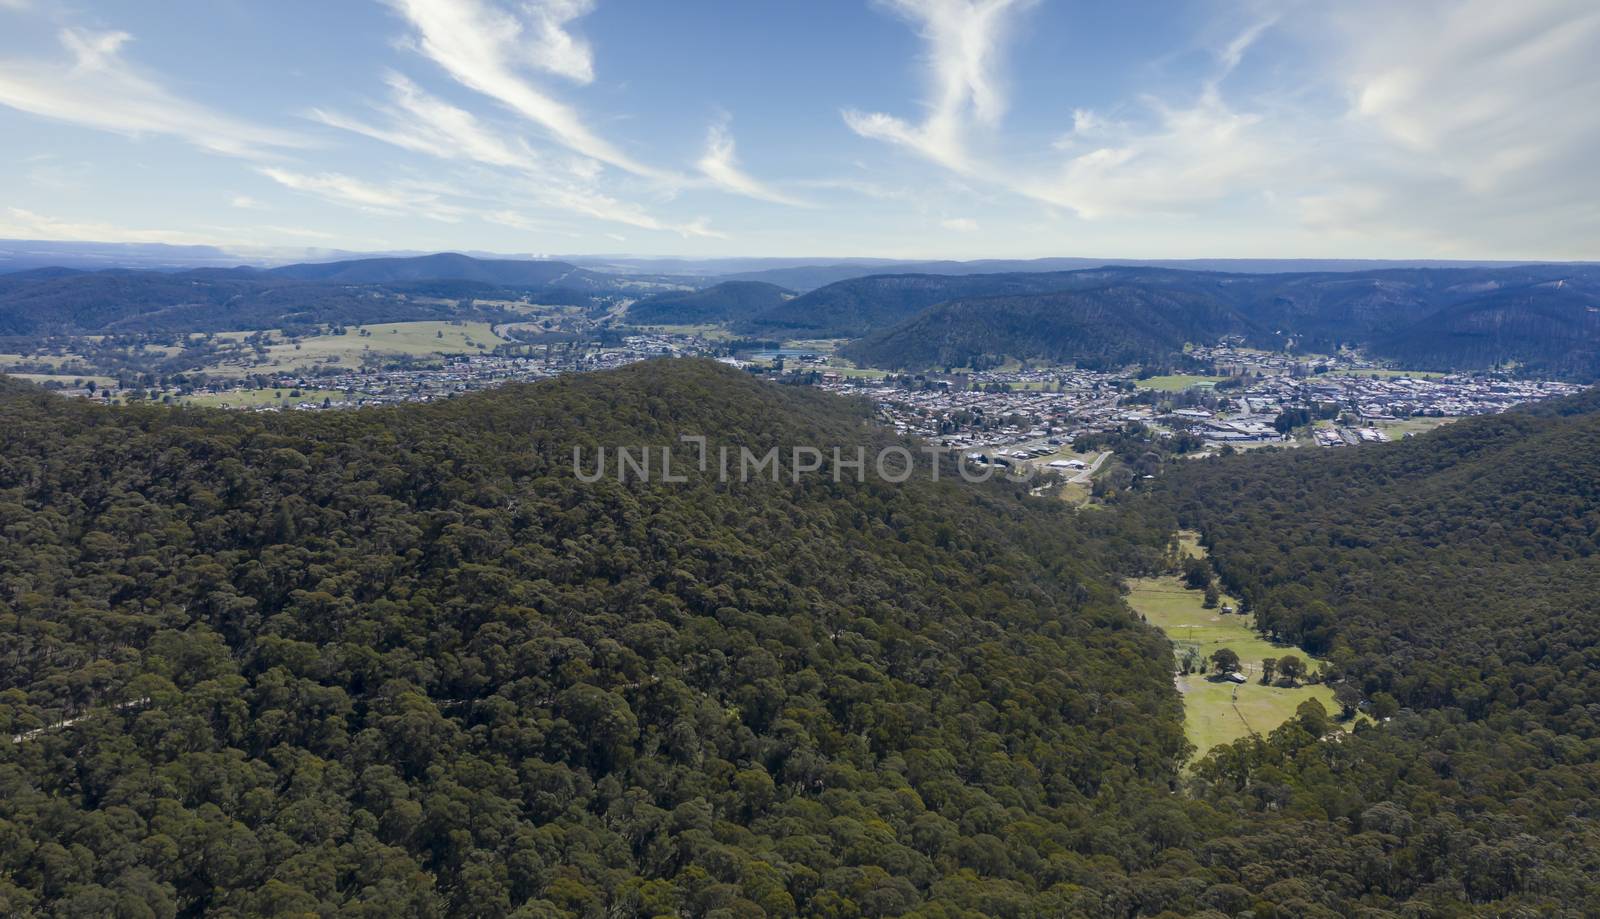 The township of Lithgow nestled in a valley in the Central Tablelands of New South Wales in Australia